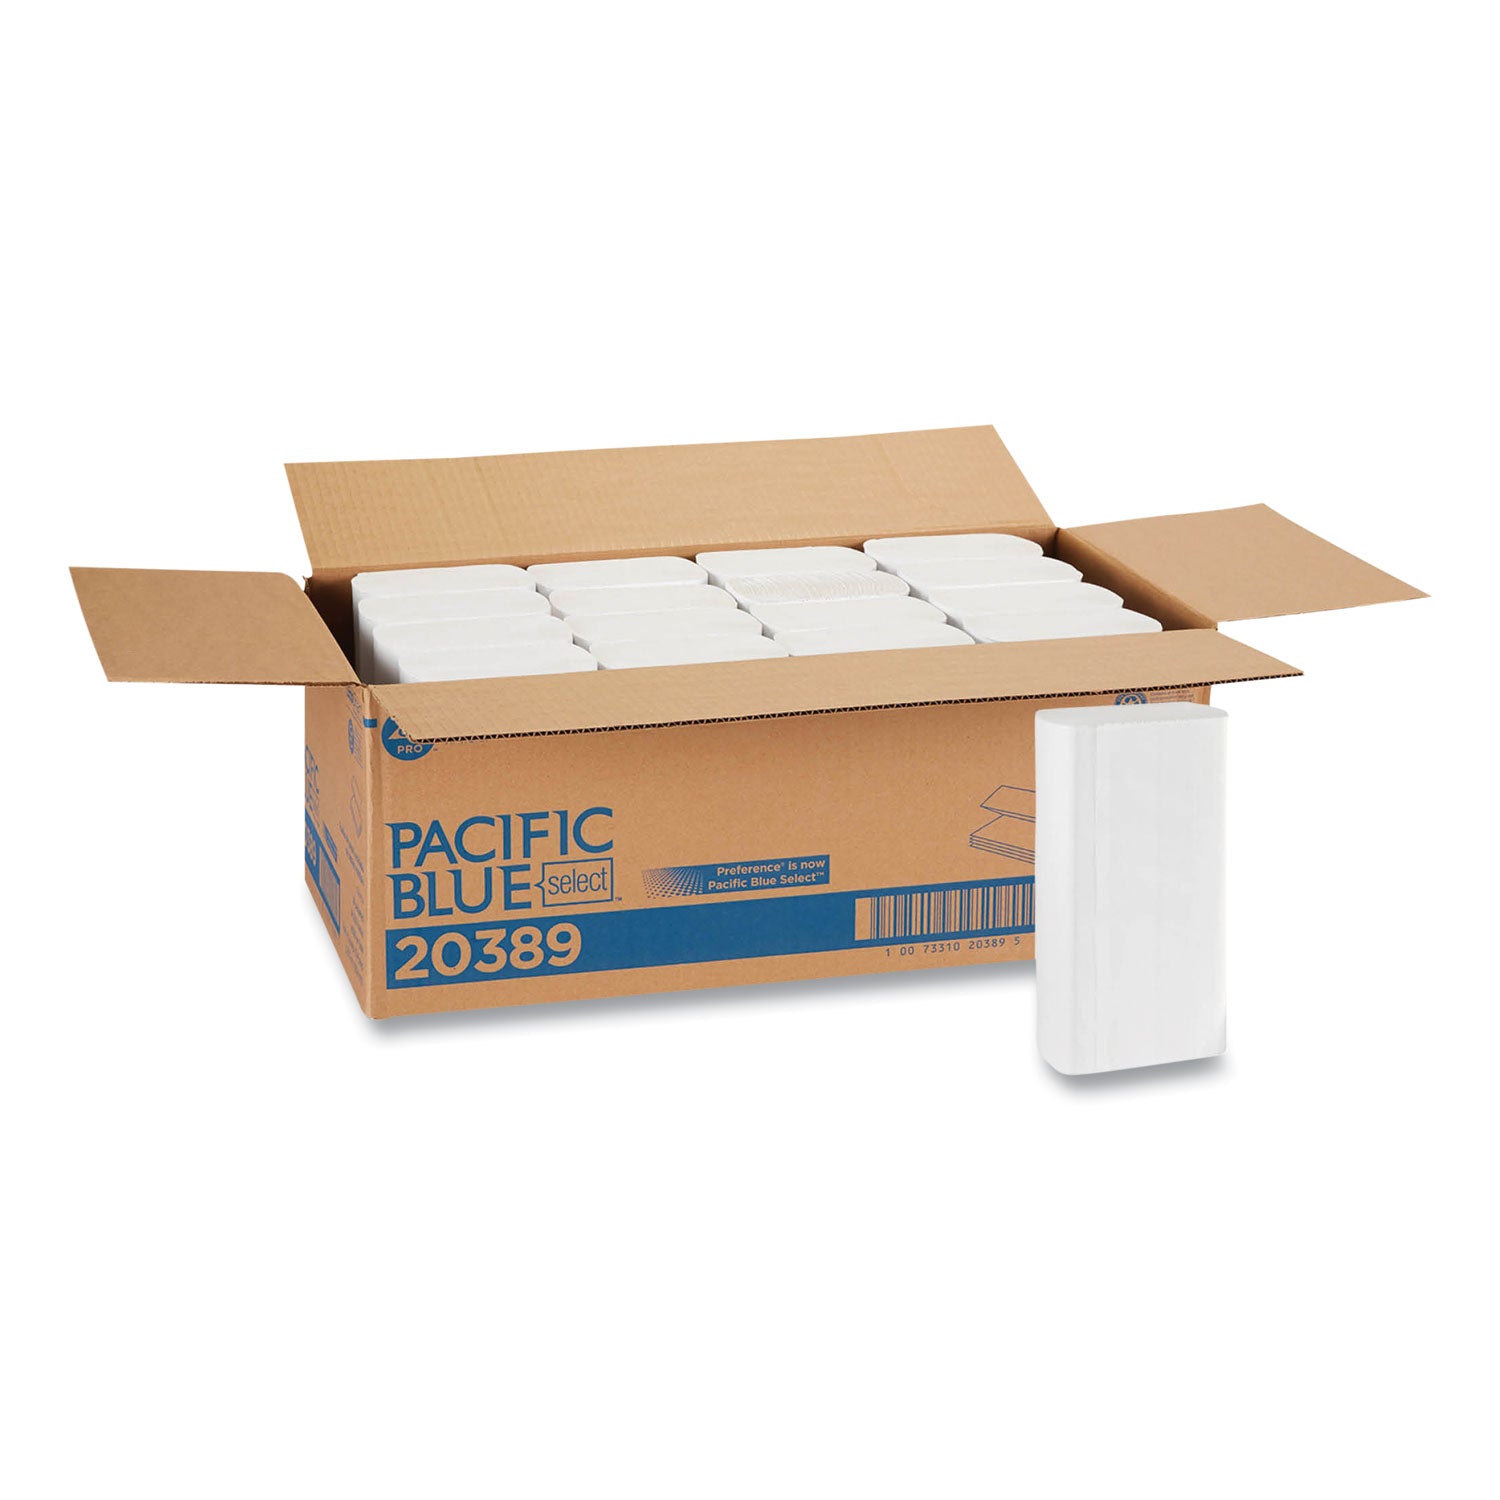 Pacific Blue Select Folded Paper Towels, 1-Ply, 9.2 x 9.4, White, 250/Pack, 16 Packs/Carton - 